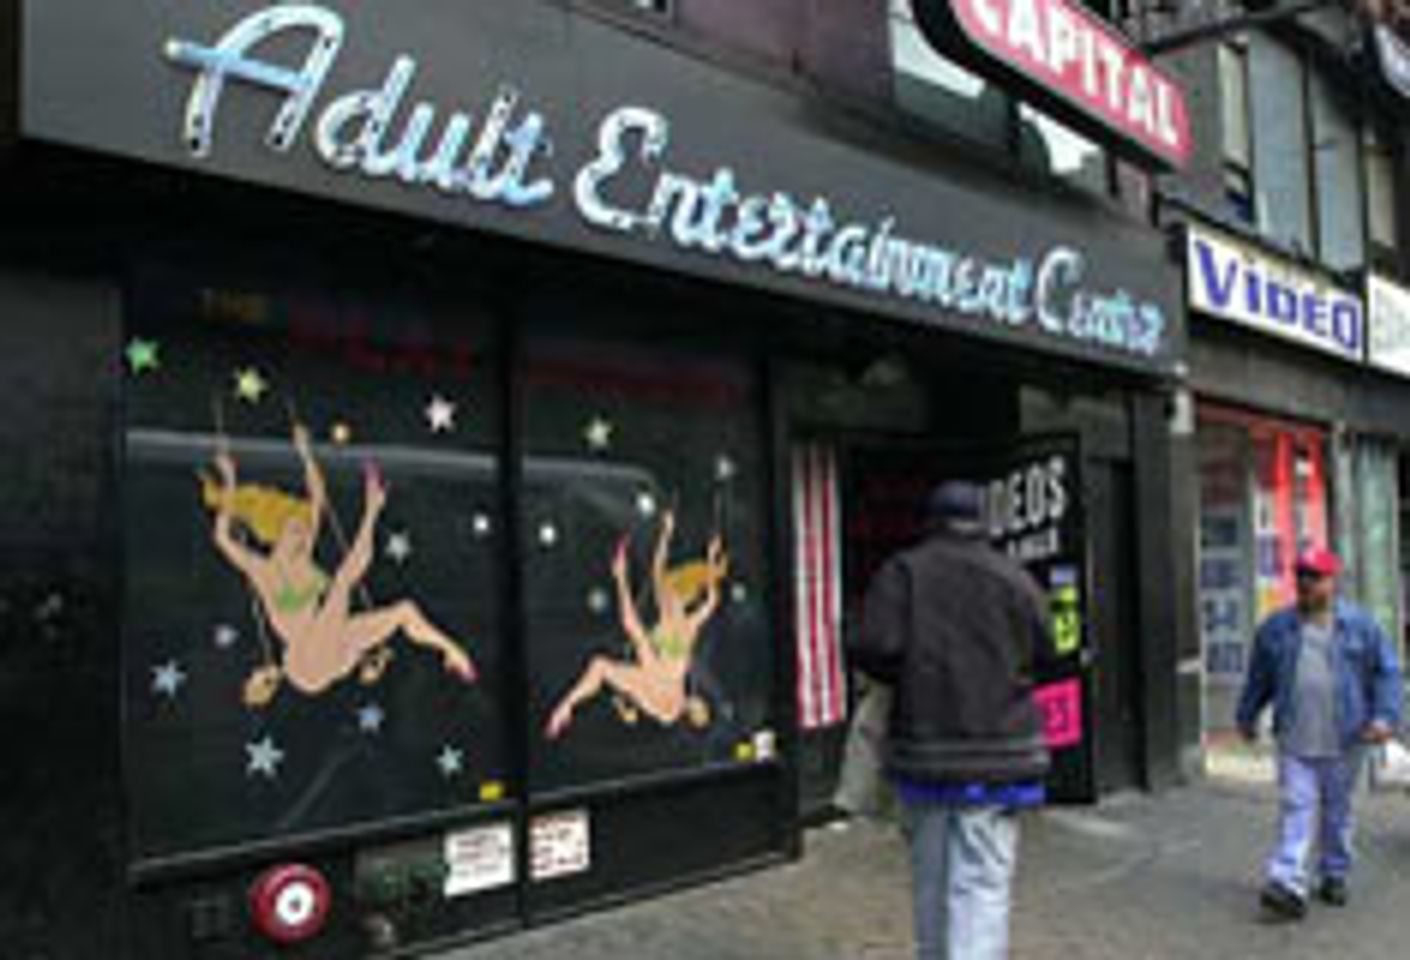 NYC Adult Businesses Face Possible Closure After Ruling